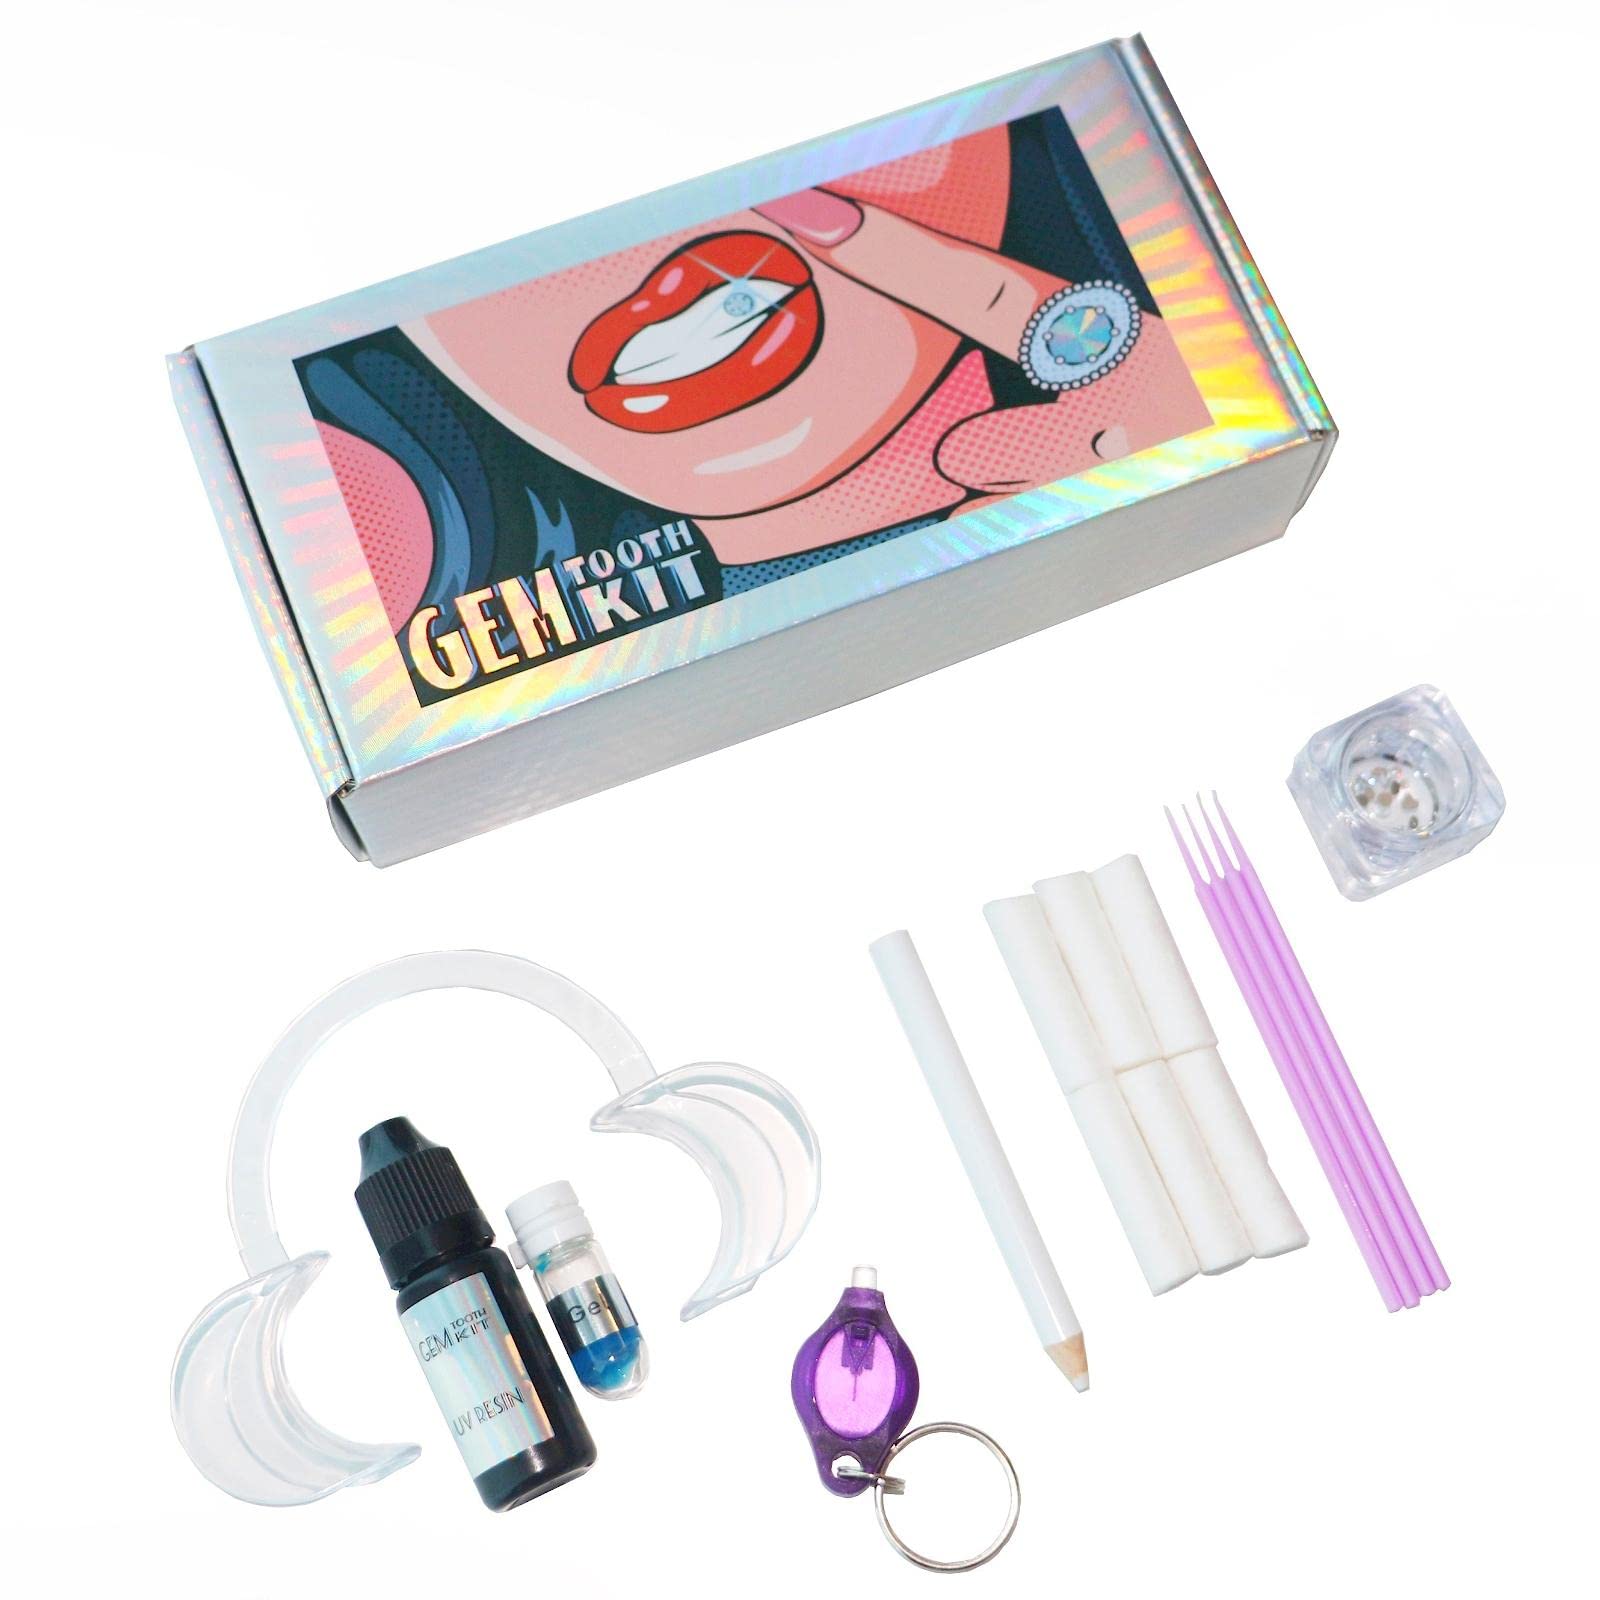 Tooth Gems Kit,Tooth Crystal Set With Curing Lamp And Glue, 20 Piece  Crystal Jewelry Starter Set,A 